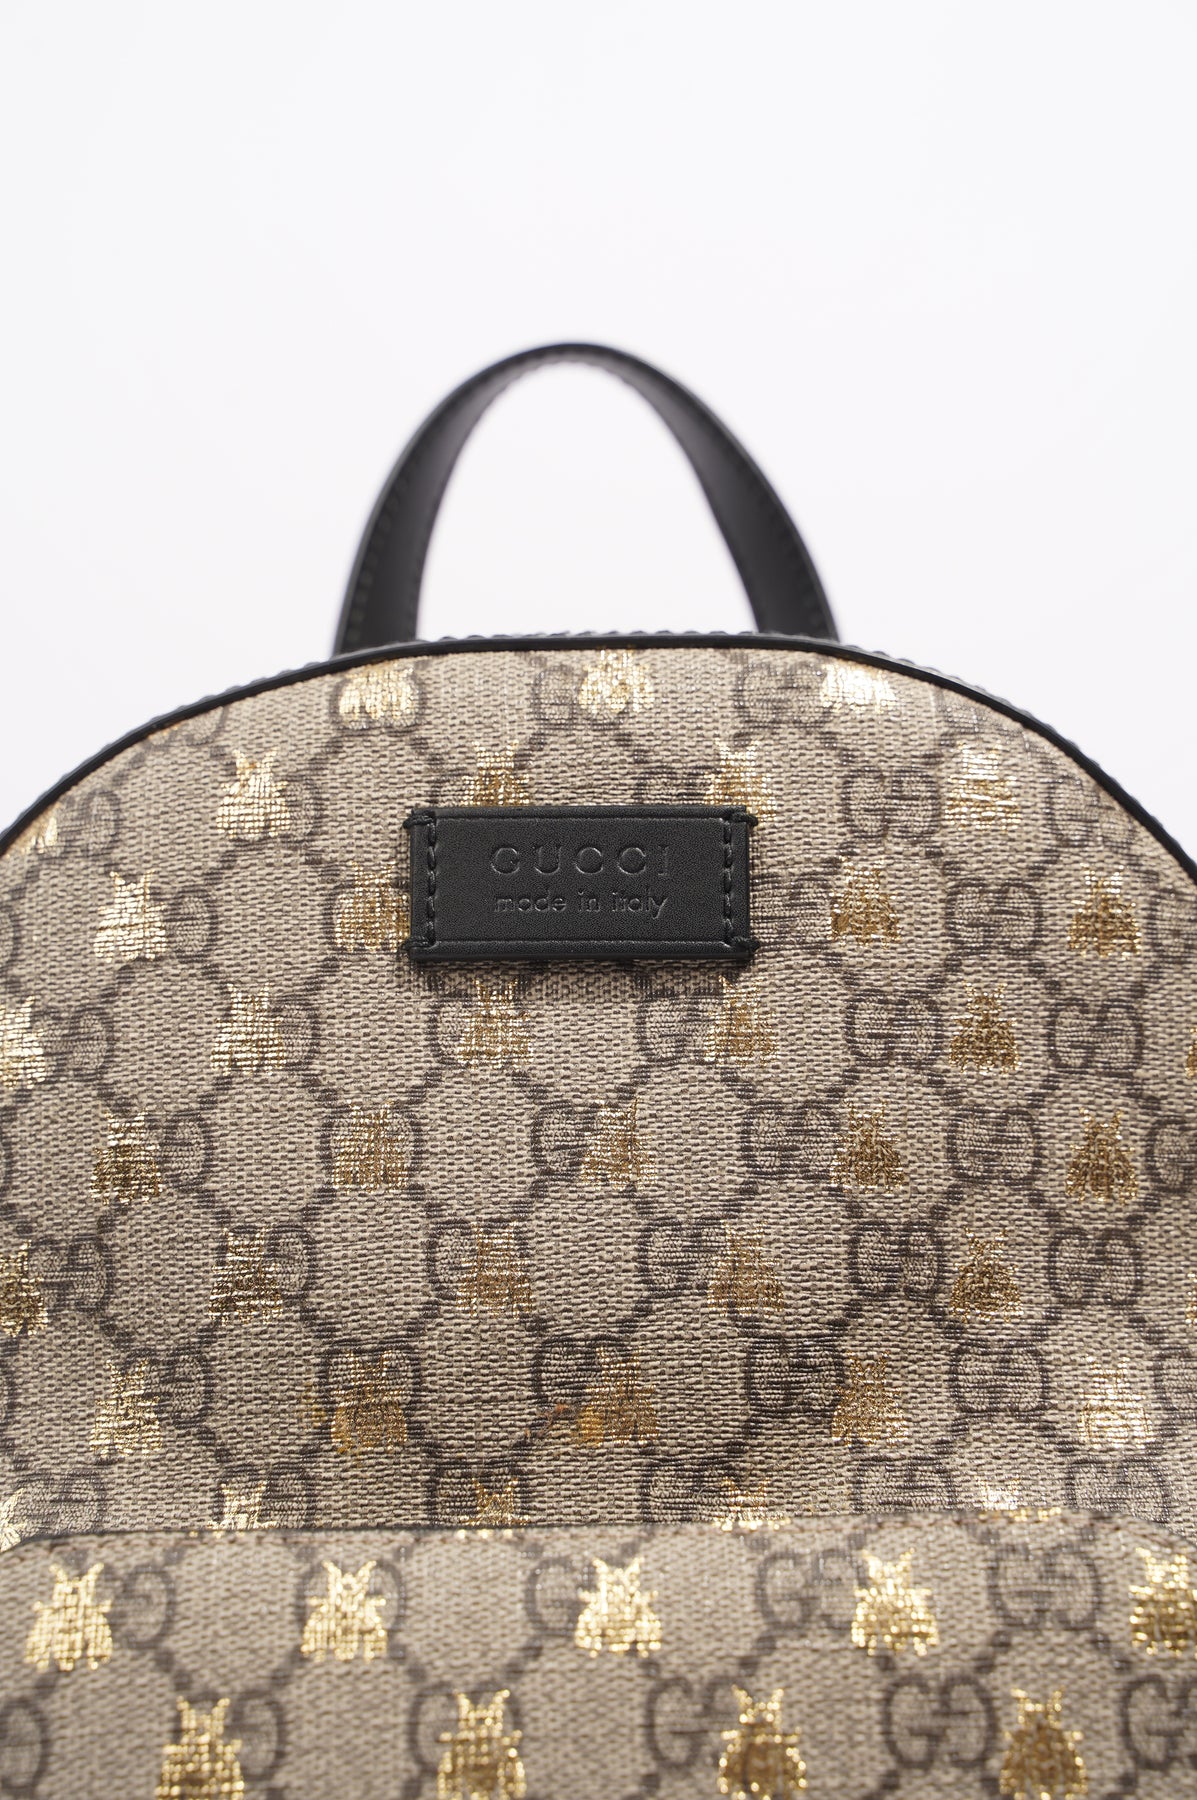 Gucci Beige/Black GG Supreme Canvas and Leather Bees Backpack Gucci